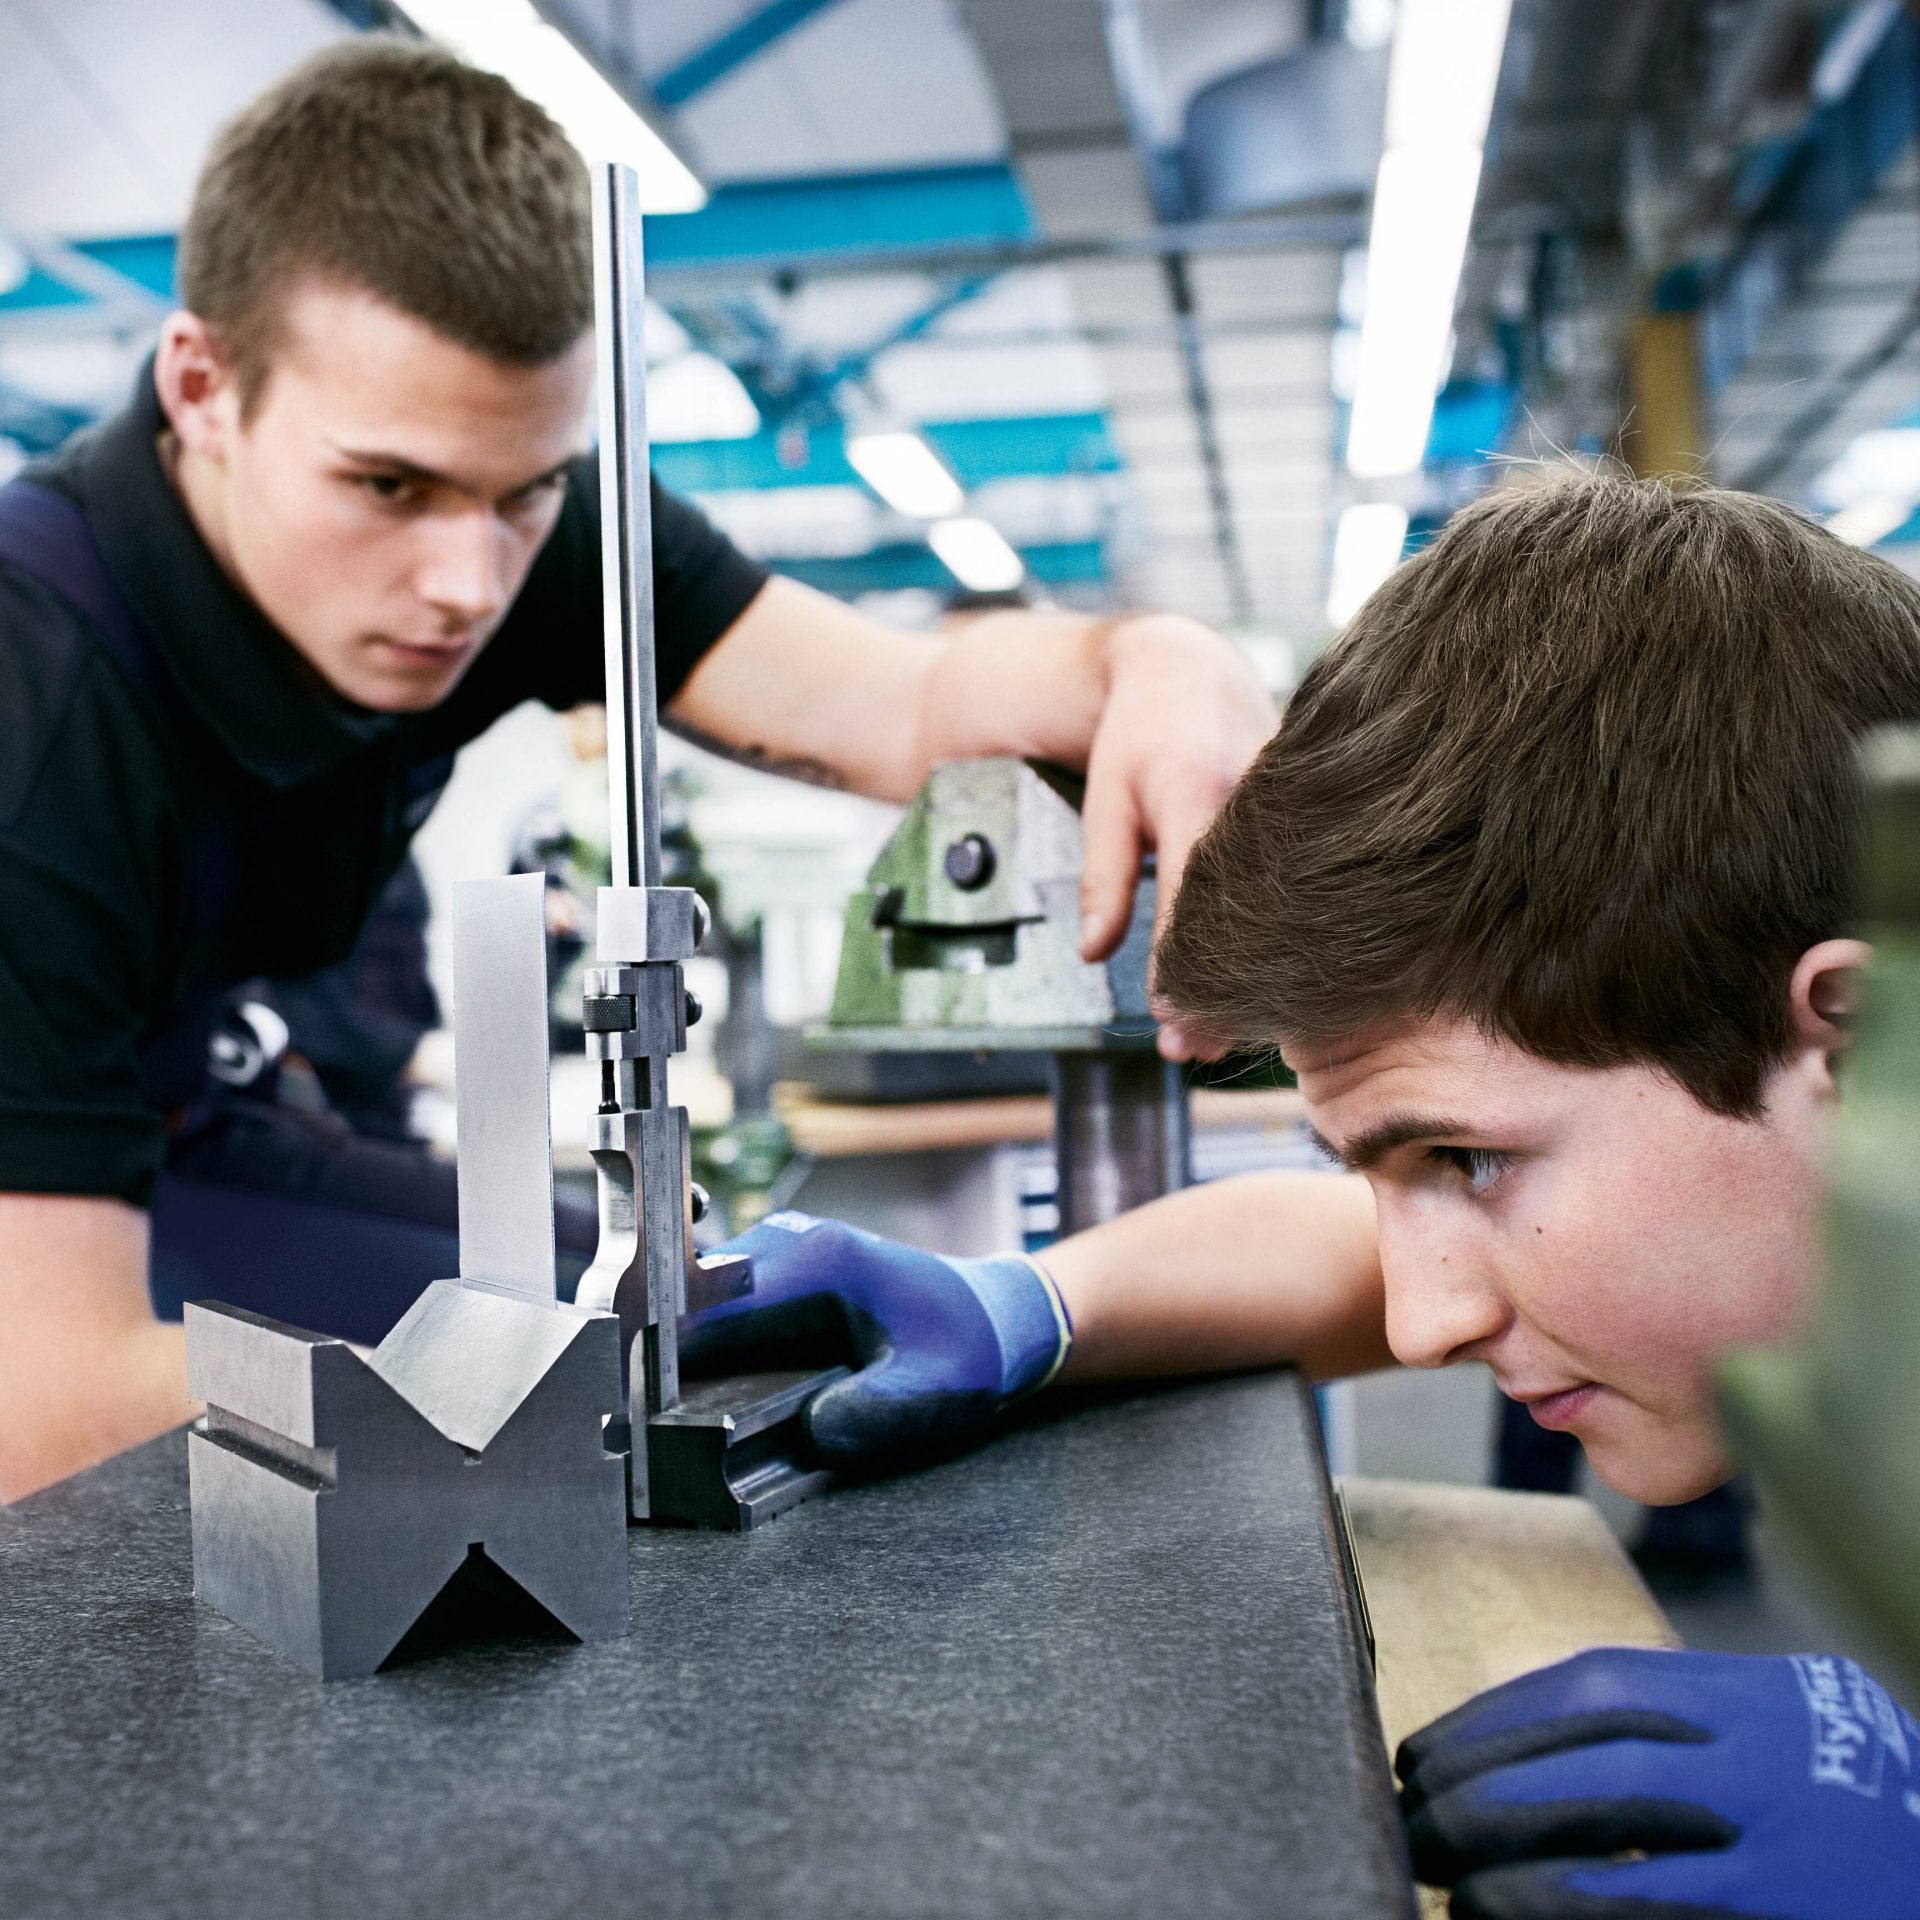 The picture shows two apprentices doing a task during their apprenticeship.